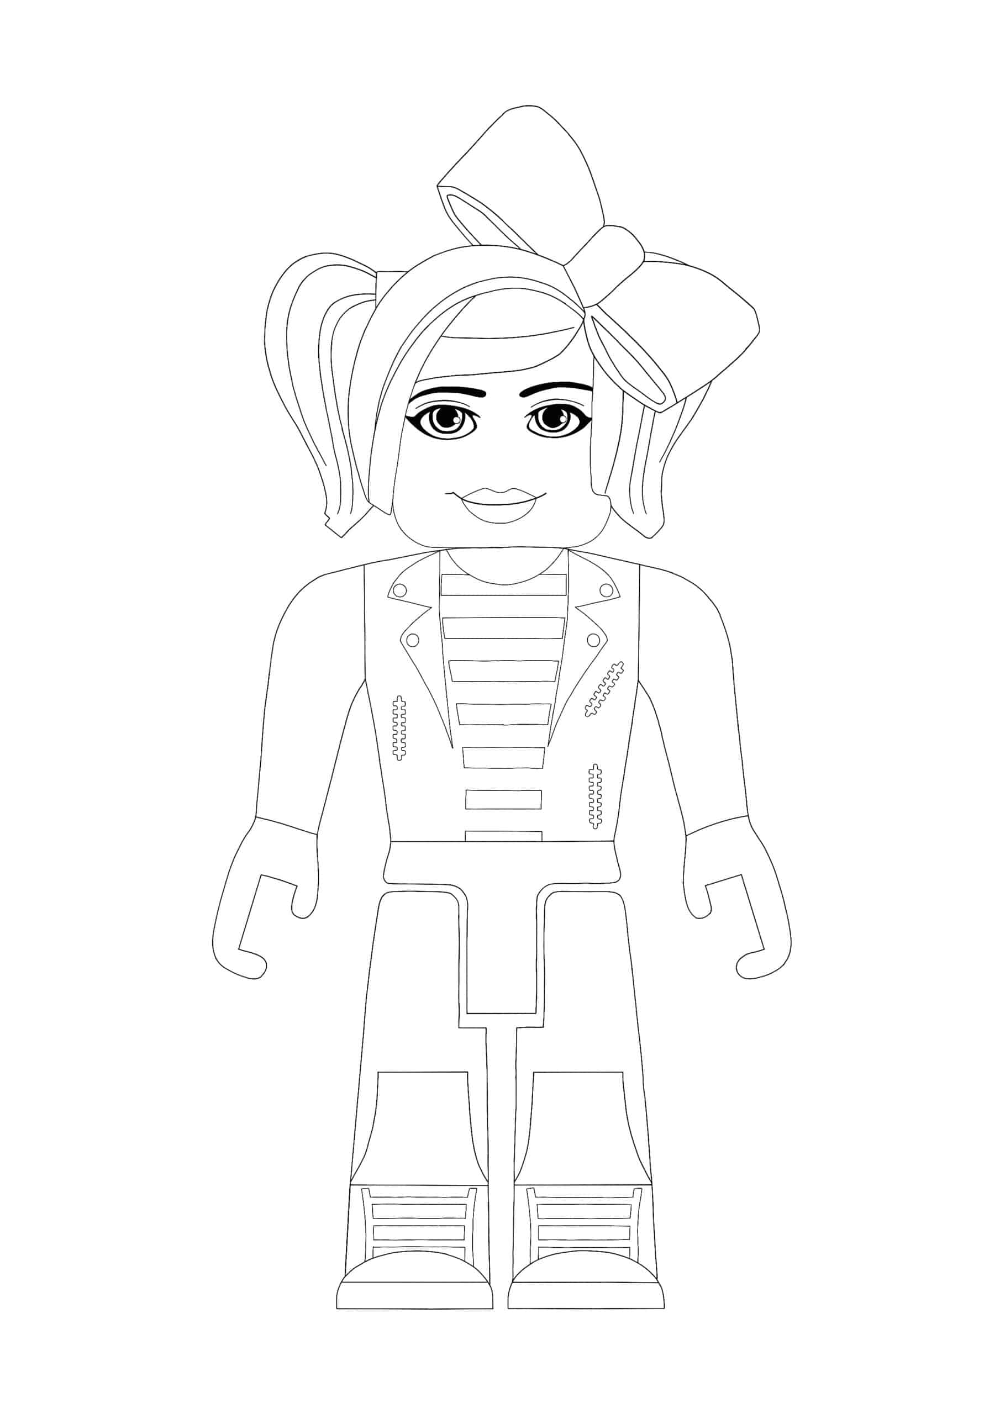 Roblox Girl Coloring Pages - 2 Free Coloring Sheets (2021) | Coloring pages,  Coloring pages for girls, Free printable coloring sheets